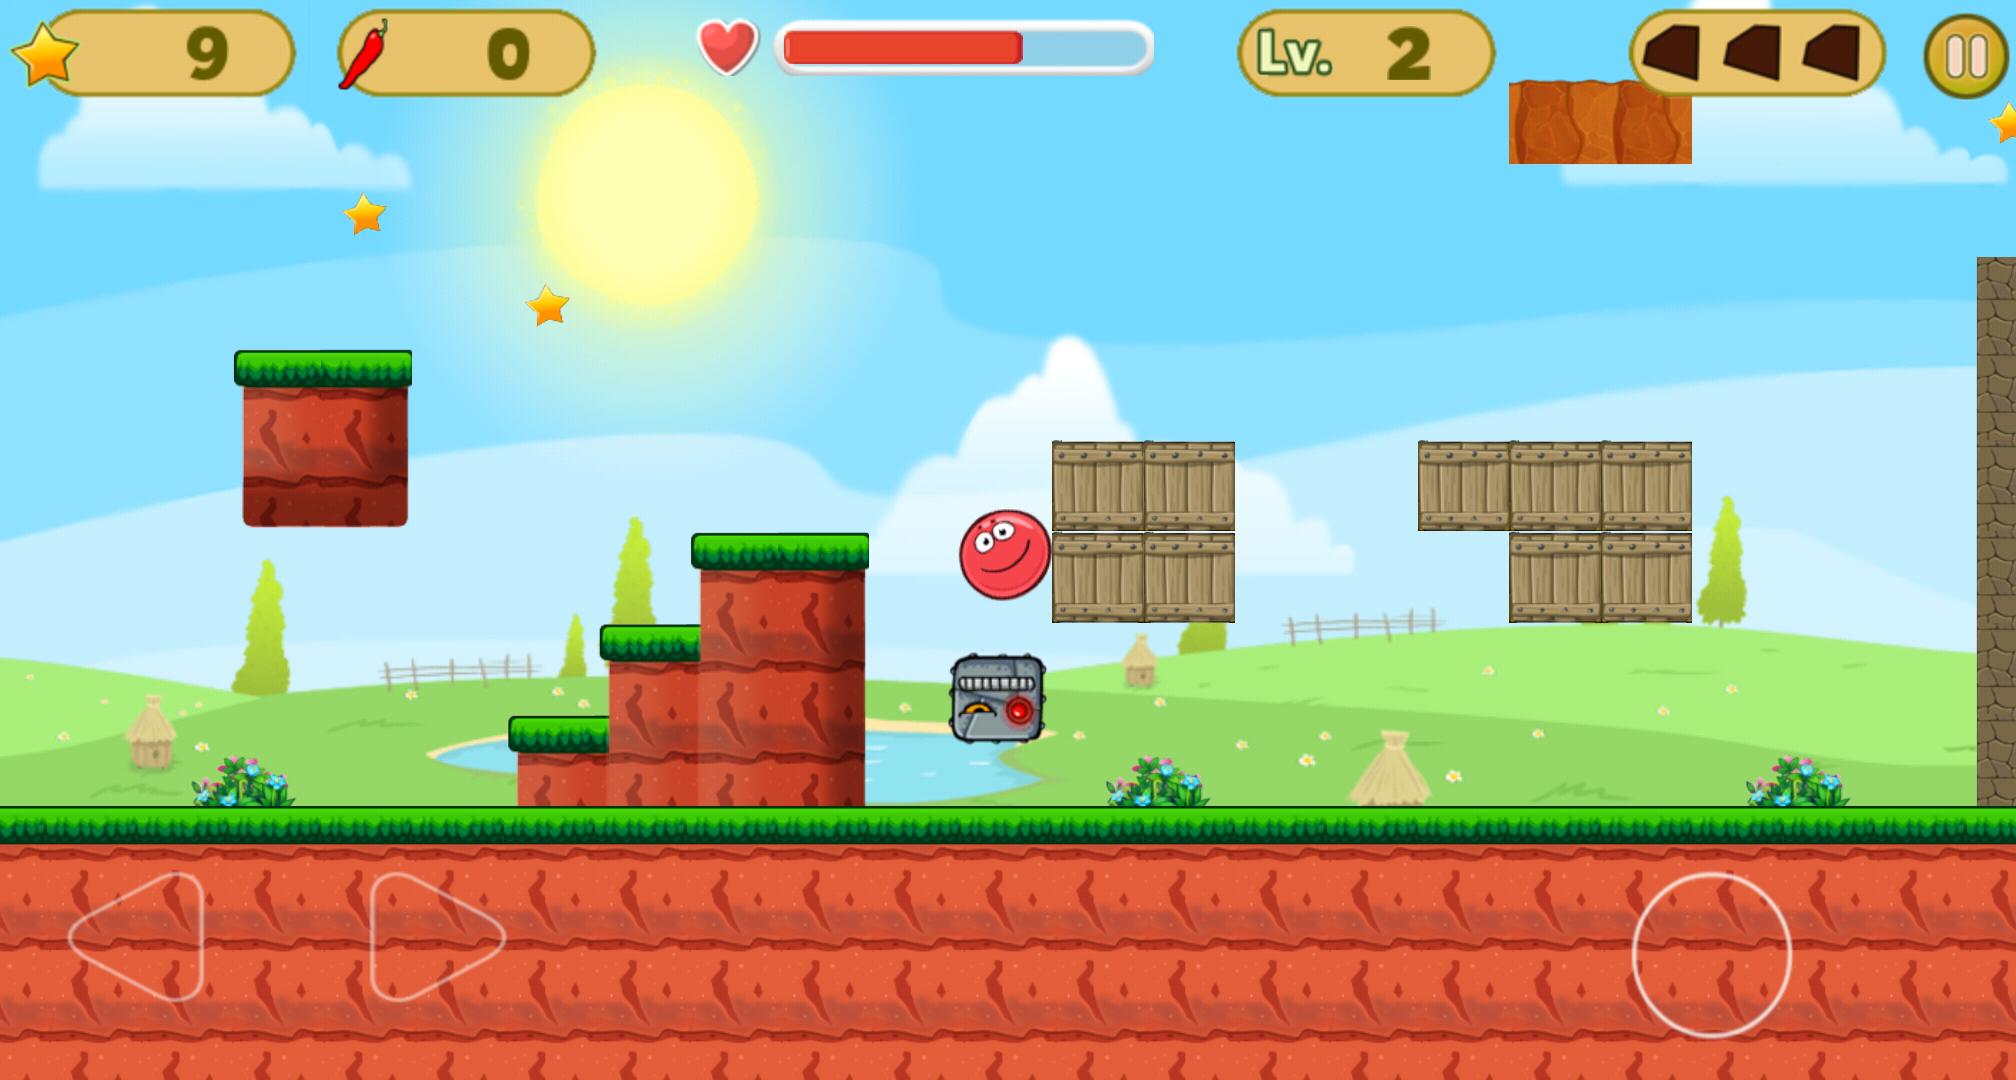 Jump Ball 4 - New Red Ball Adventure for Android - APK Download